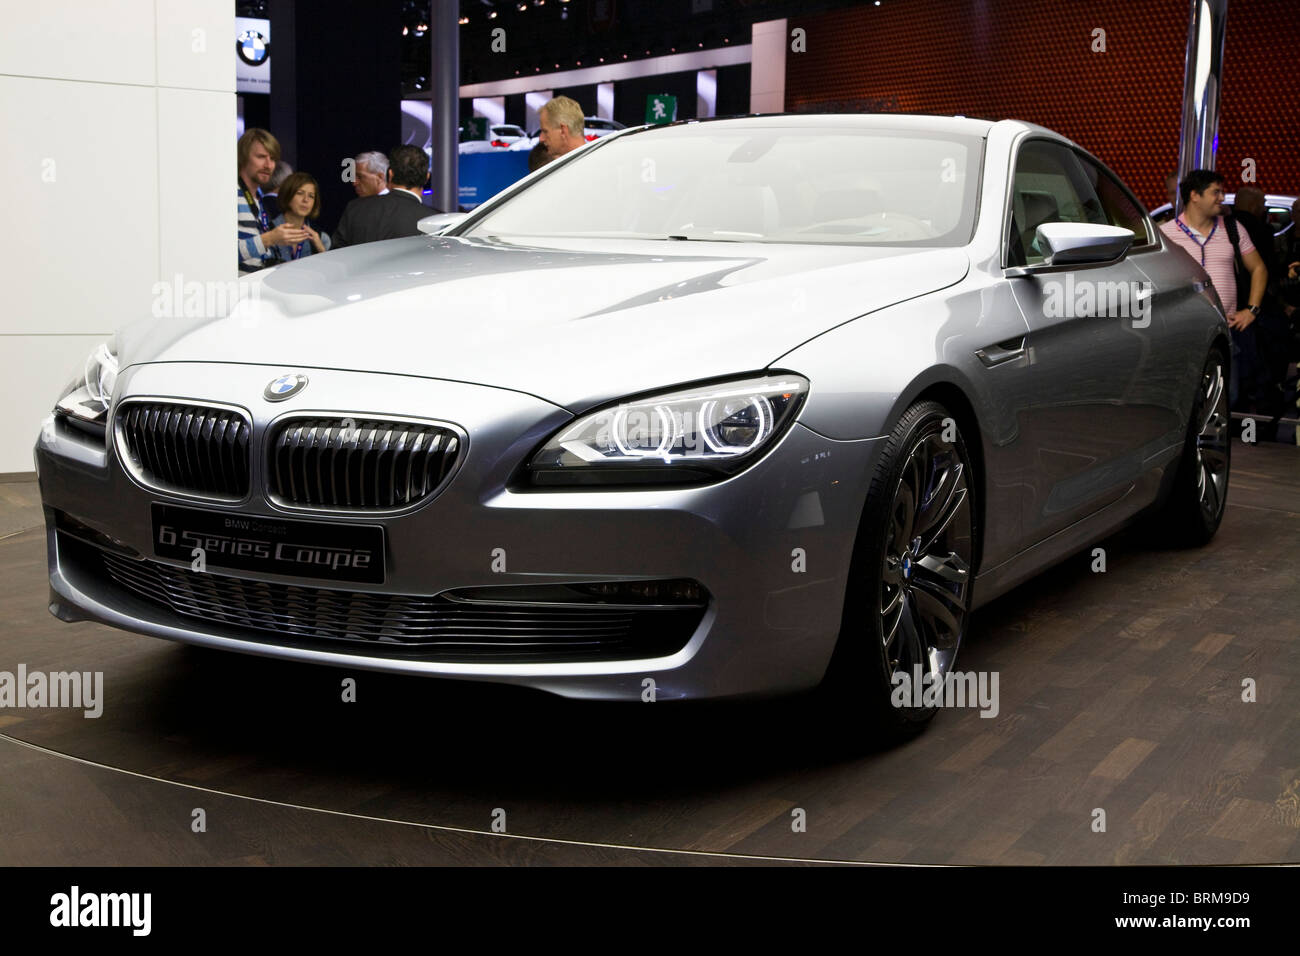 Paris motor show 2010 and the BMW 6 series coupe Stock Photo